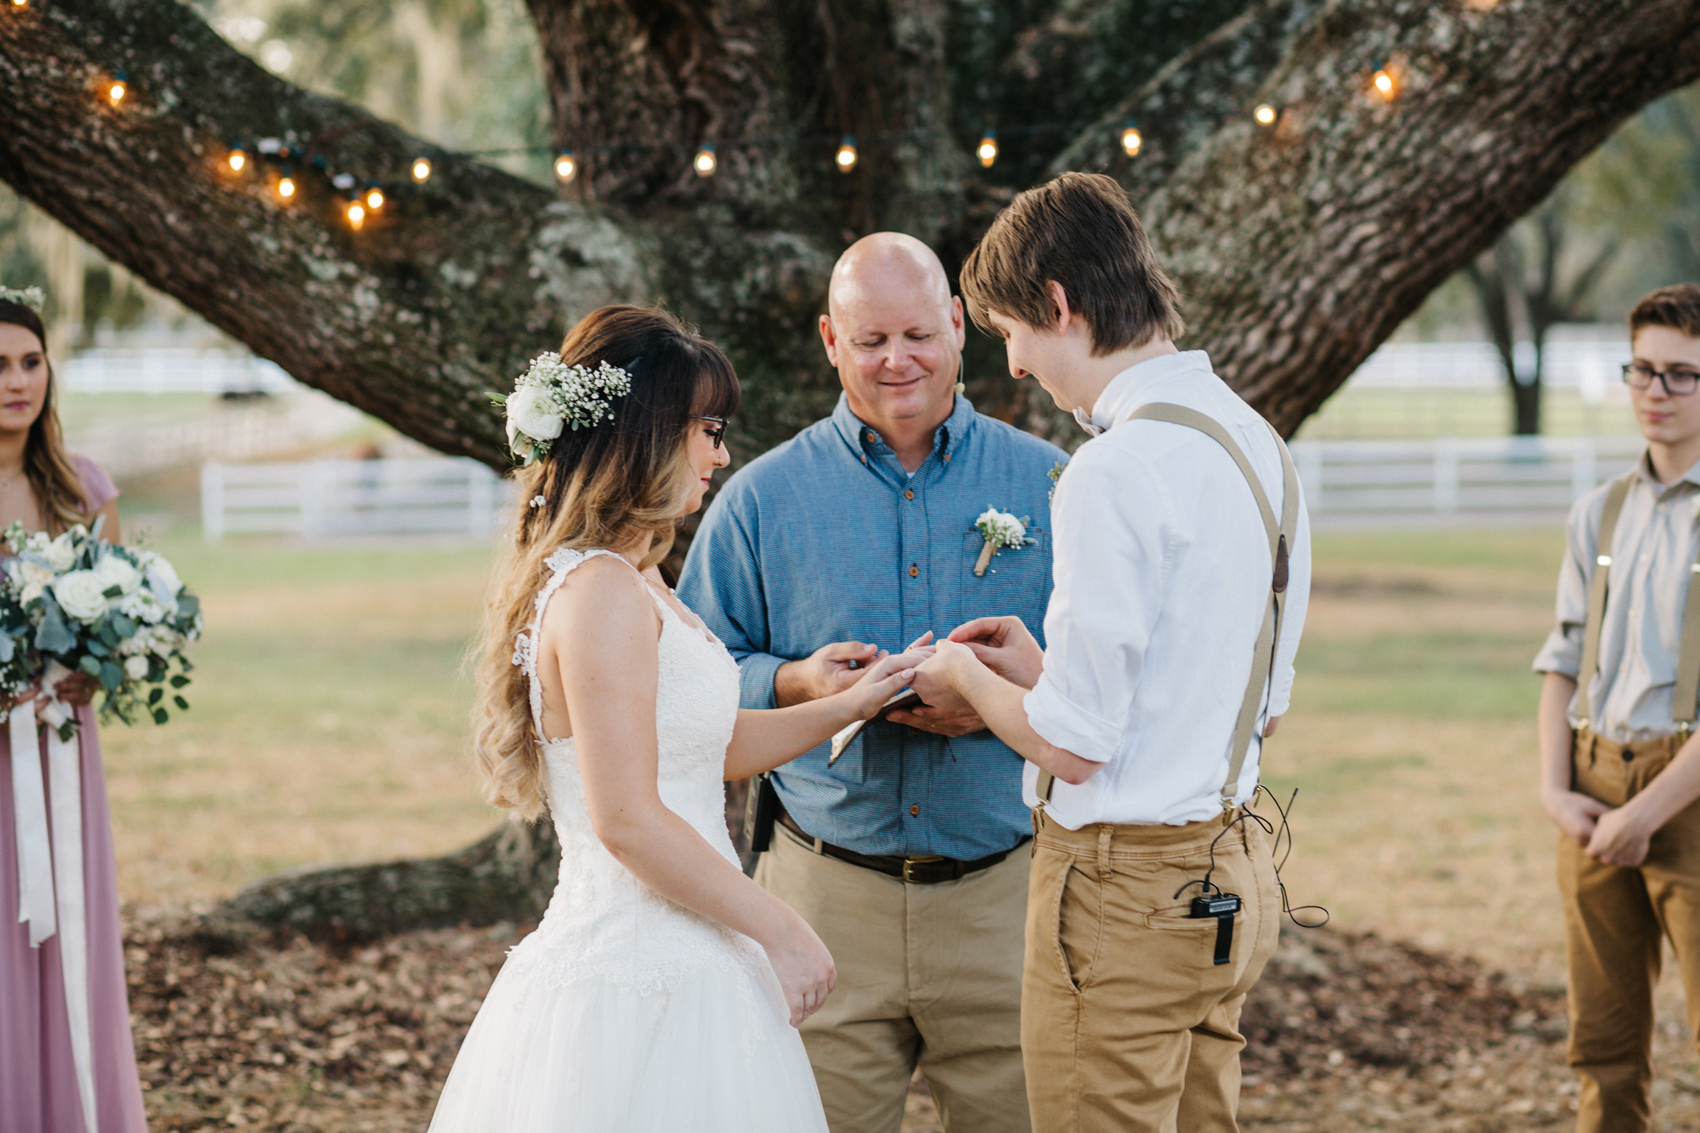 groom slipping on the wedding band during the outdoor ceremony under the oak trees in tampa, florida